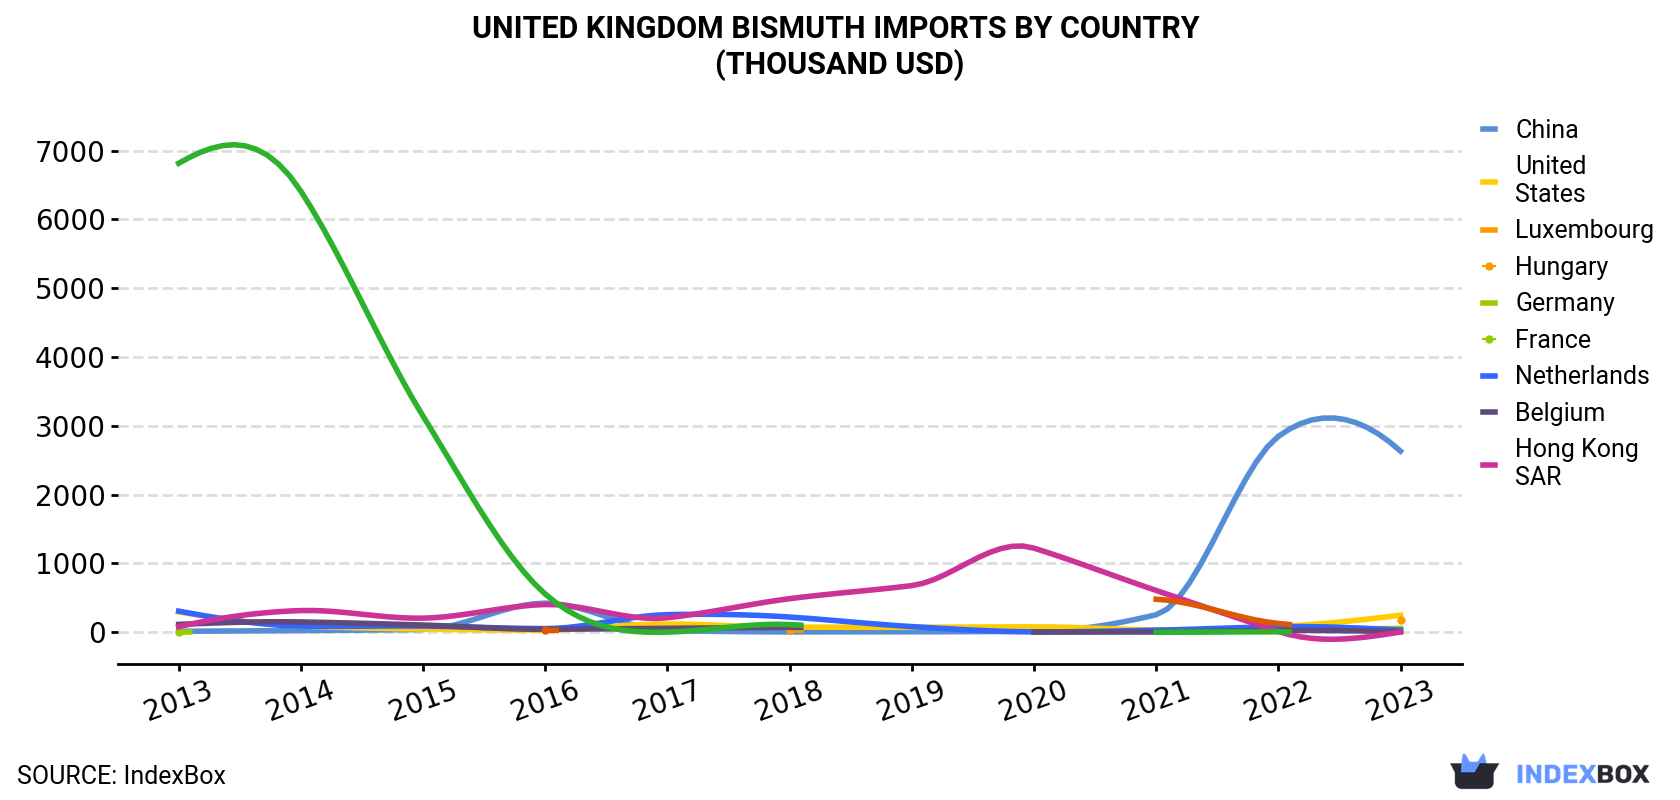 United Kingdom Bismuth Imports By Country (Thousand USD)